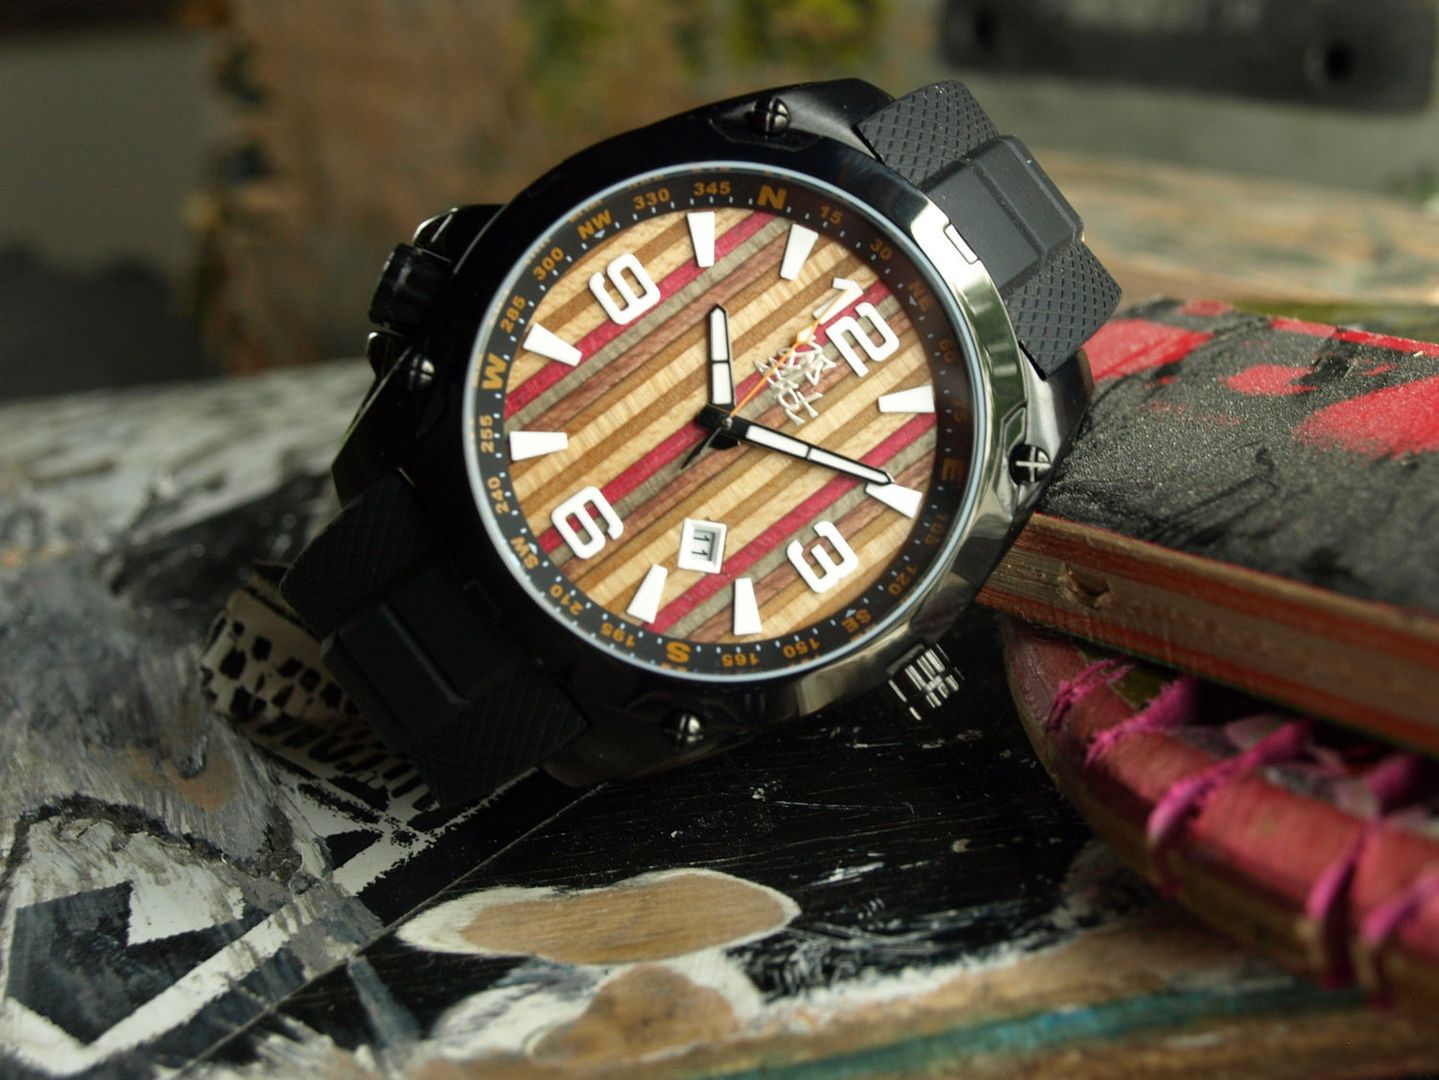 One-of-a-kind watches made from upcycled skateboard decks. So cool!